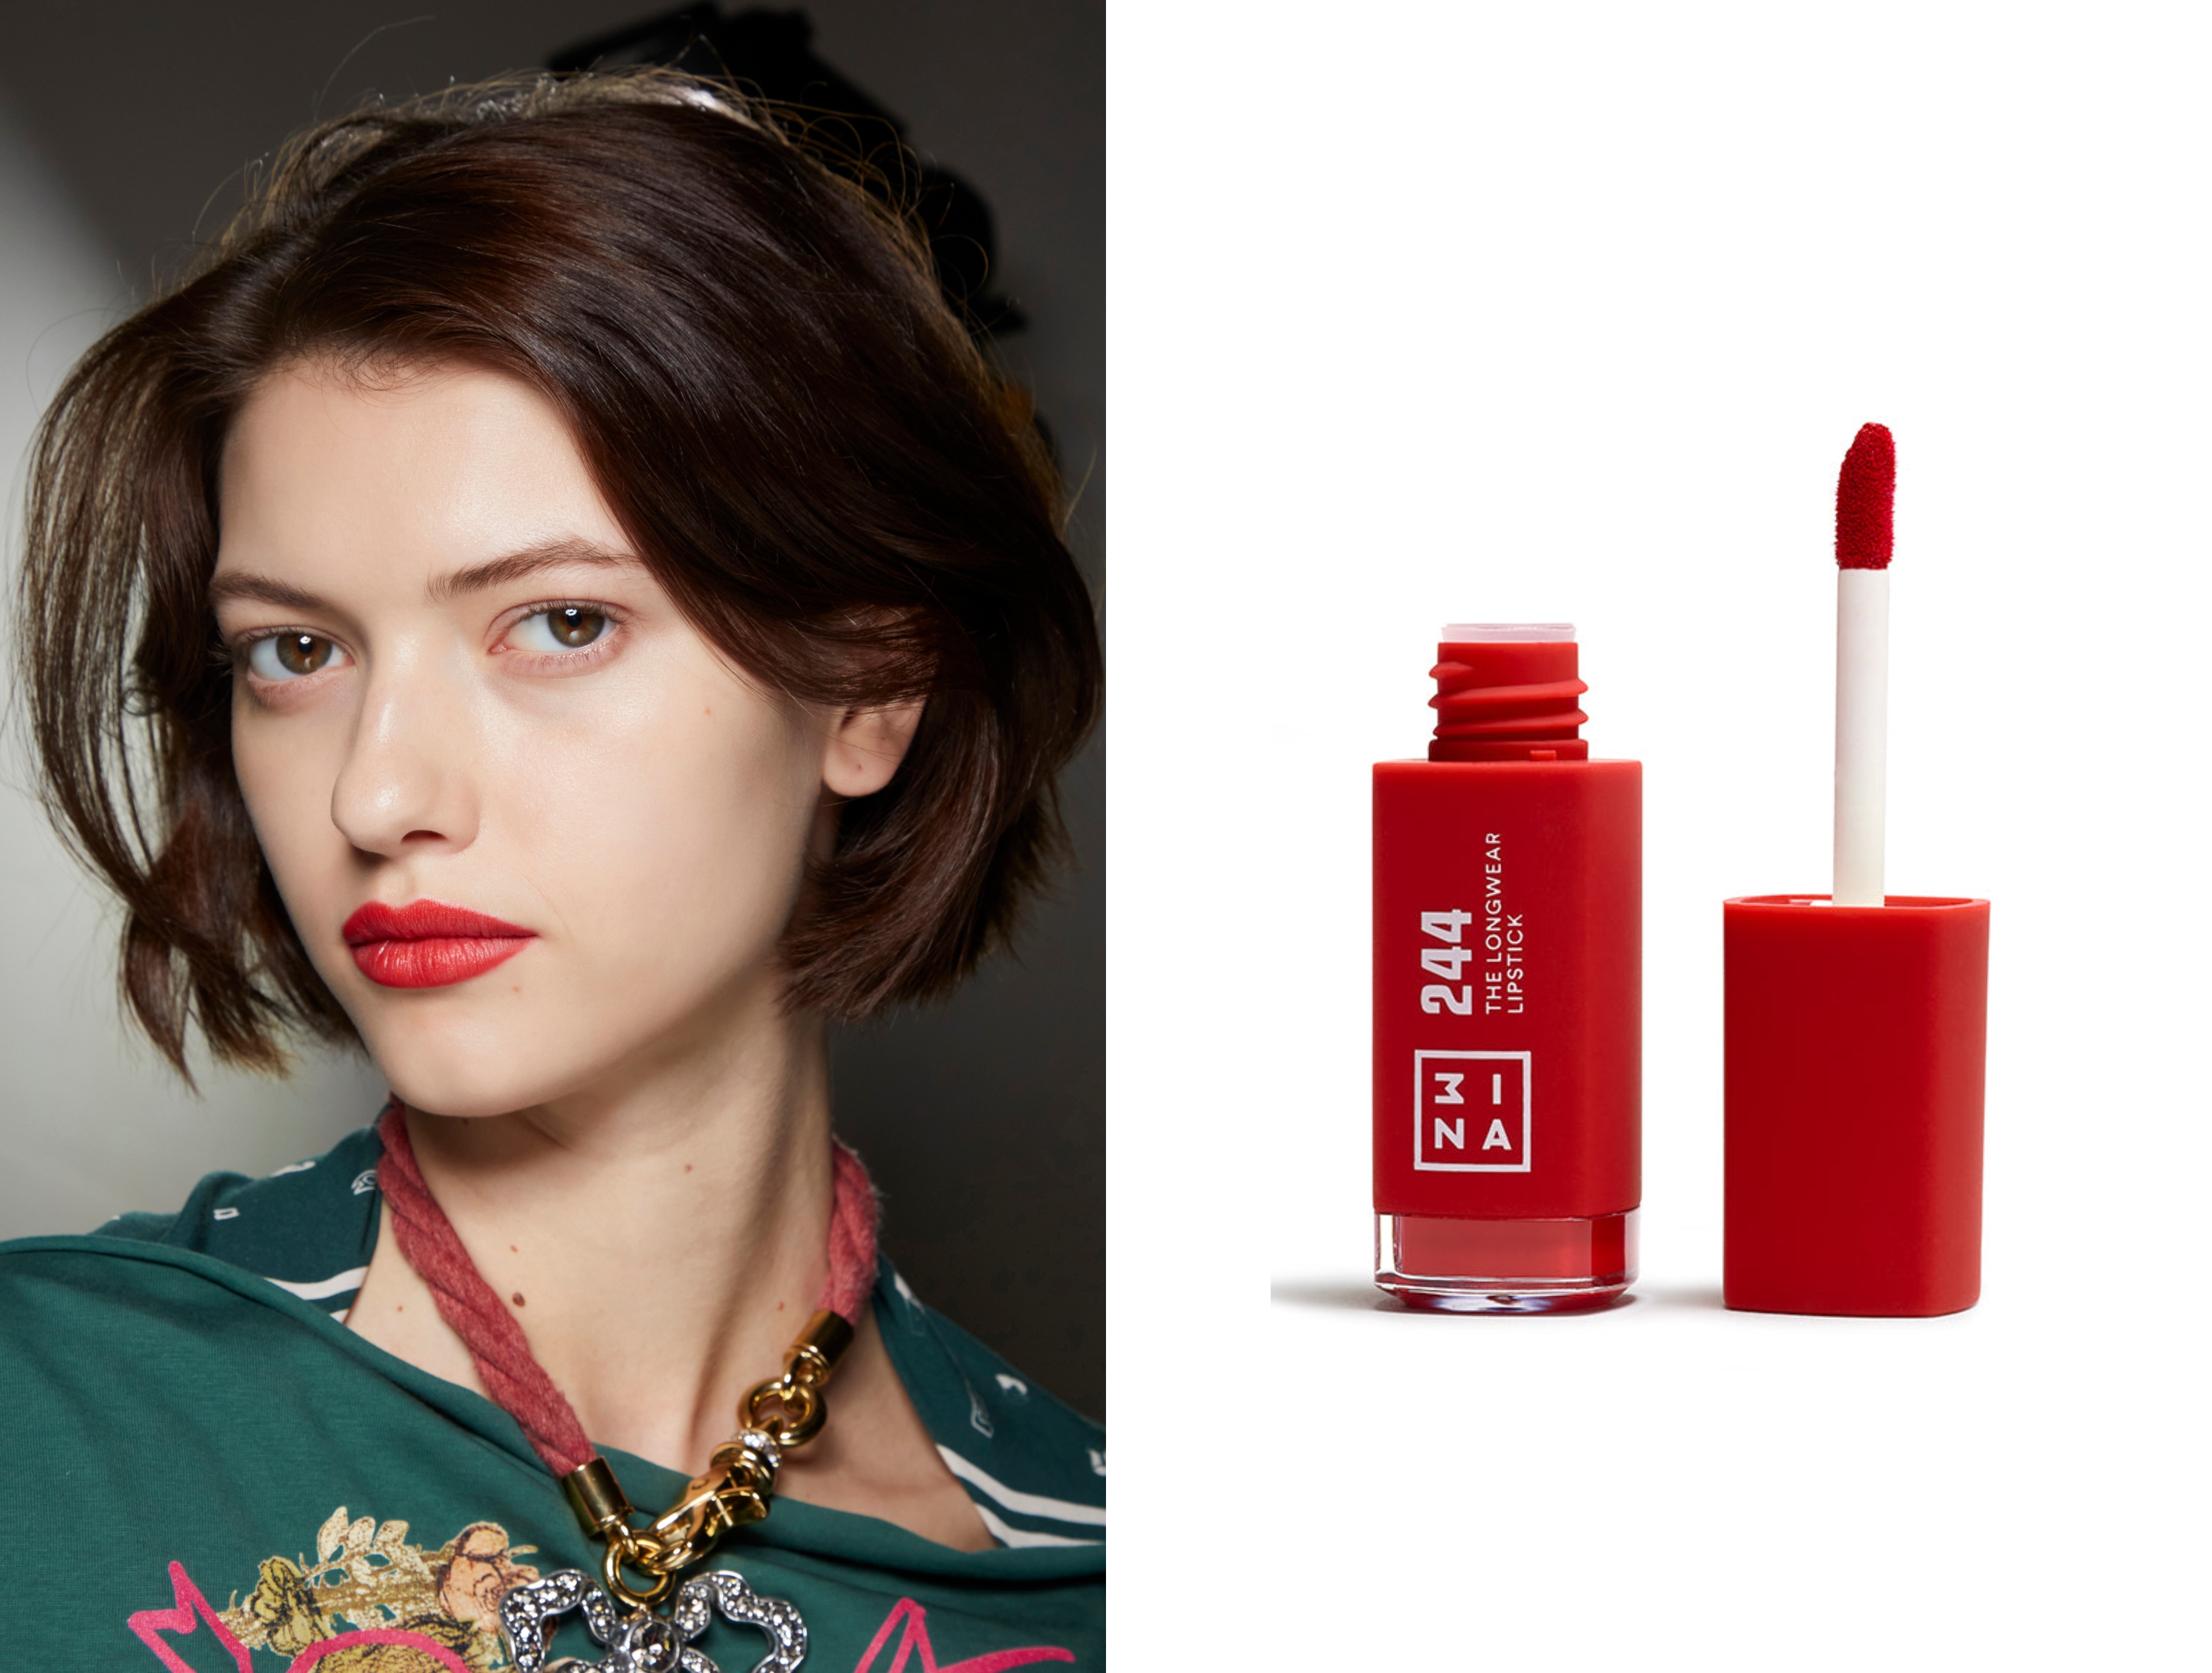 Andreas Kronthaler for Vivienne Westwood FW22 and The Longewear Lipstick 224 by 3INA